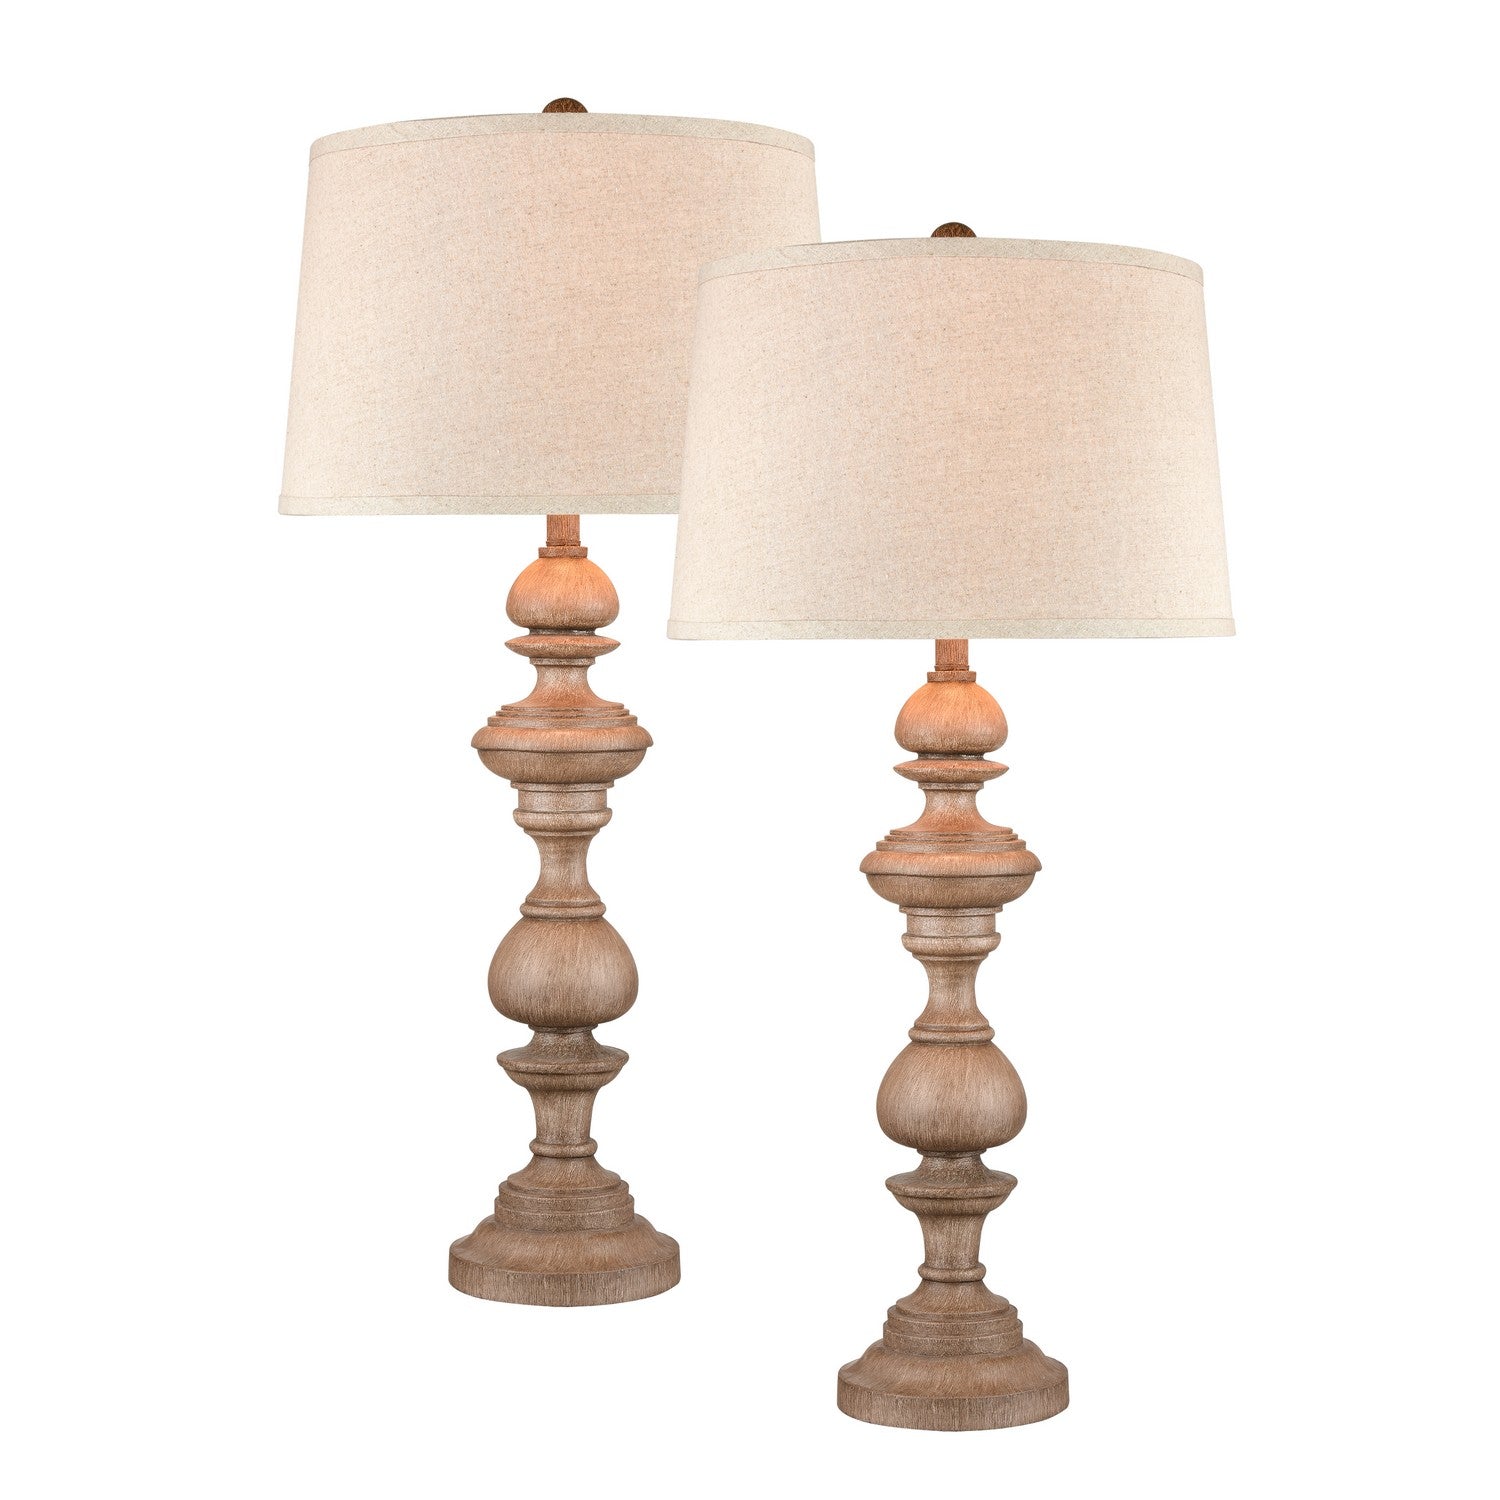 ELK Home - S0019-8046/S2 - One Light Table Lamp - Set of 2 - Copperas Cove - Brown